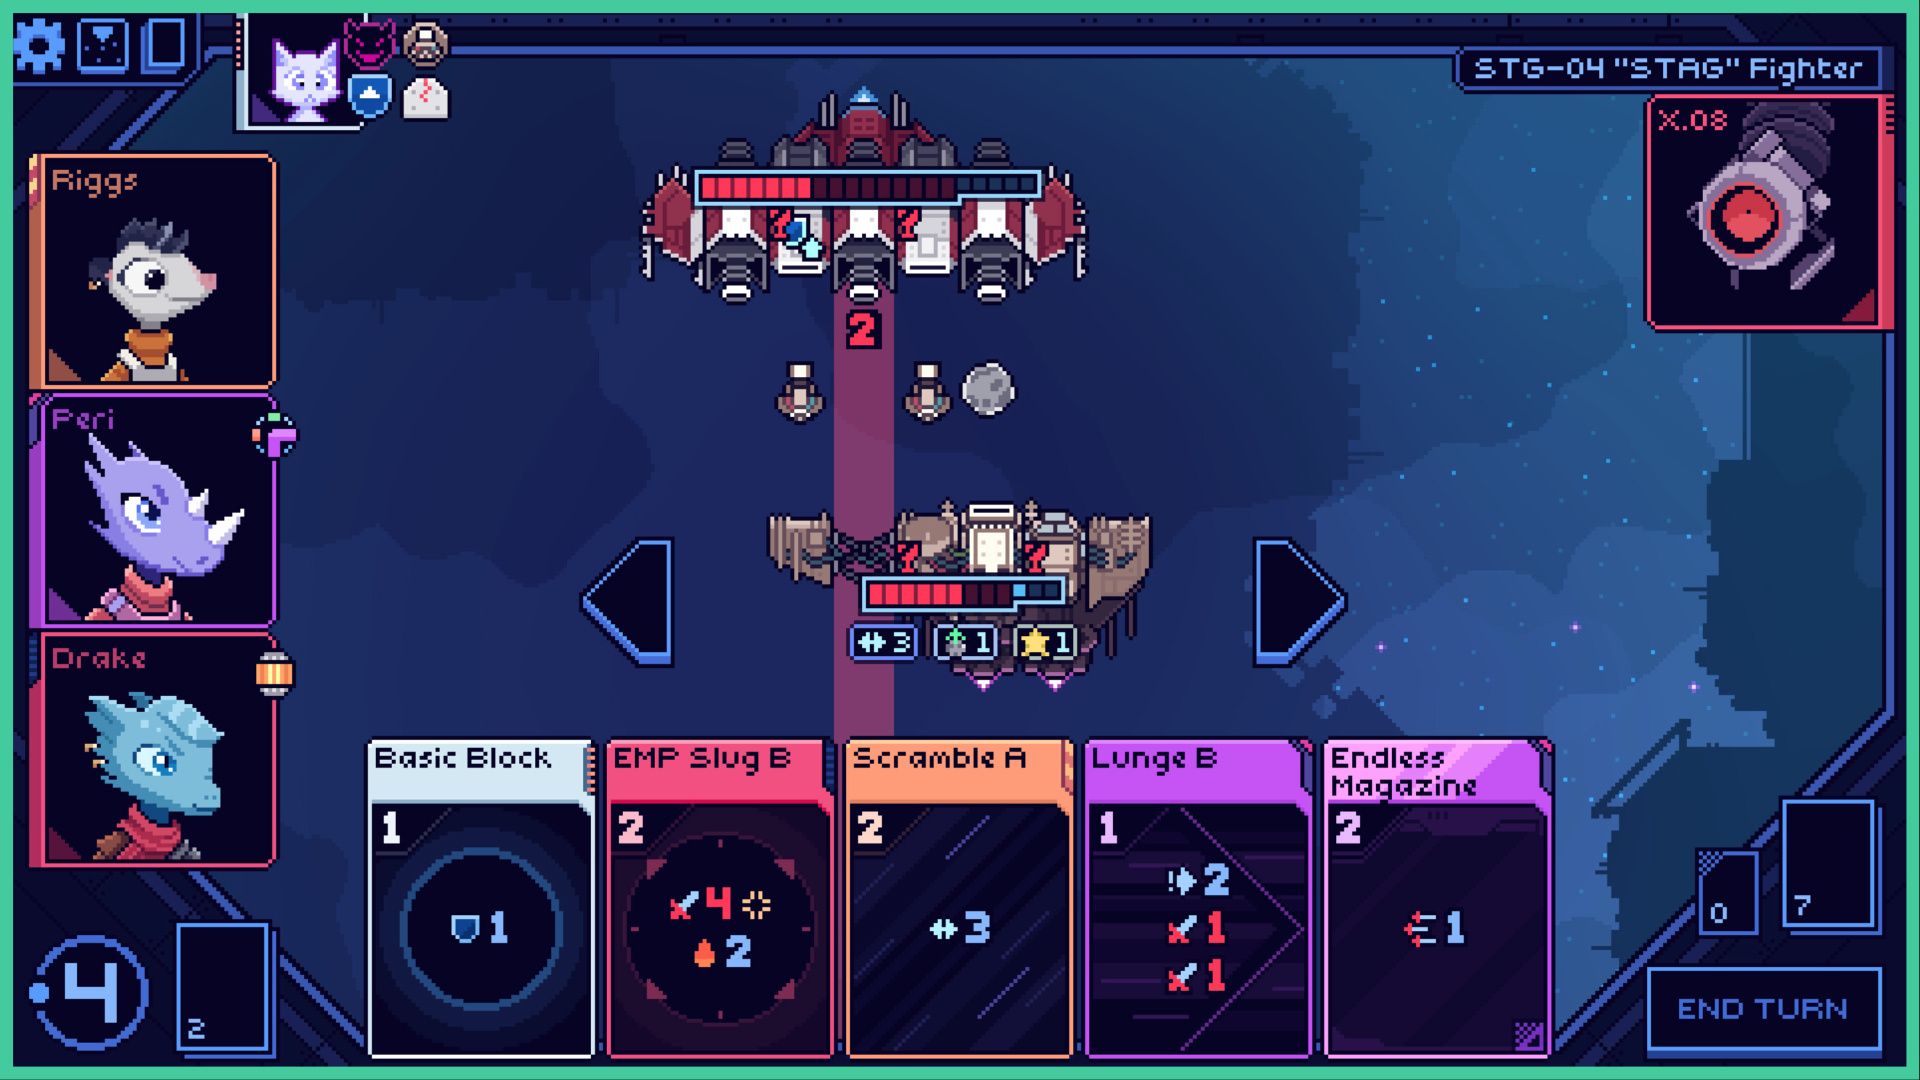 feature image for our cobalt core news, the image features a promo screenshot of a battle from the game, there is a deck of cards while 3 character portraits sit at the side in a column, there are two ships attacking each other in the middle of the screen, with the bottom ship being the player's ship